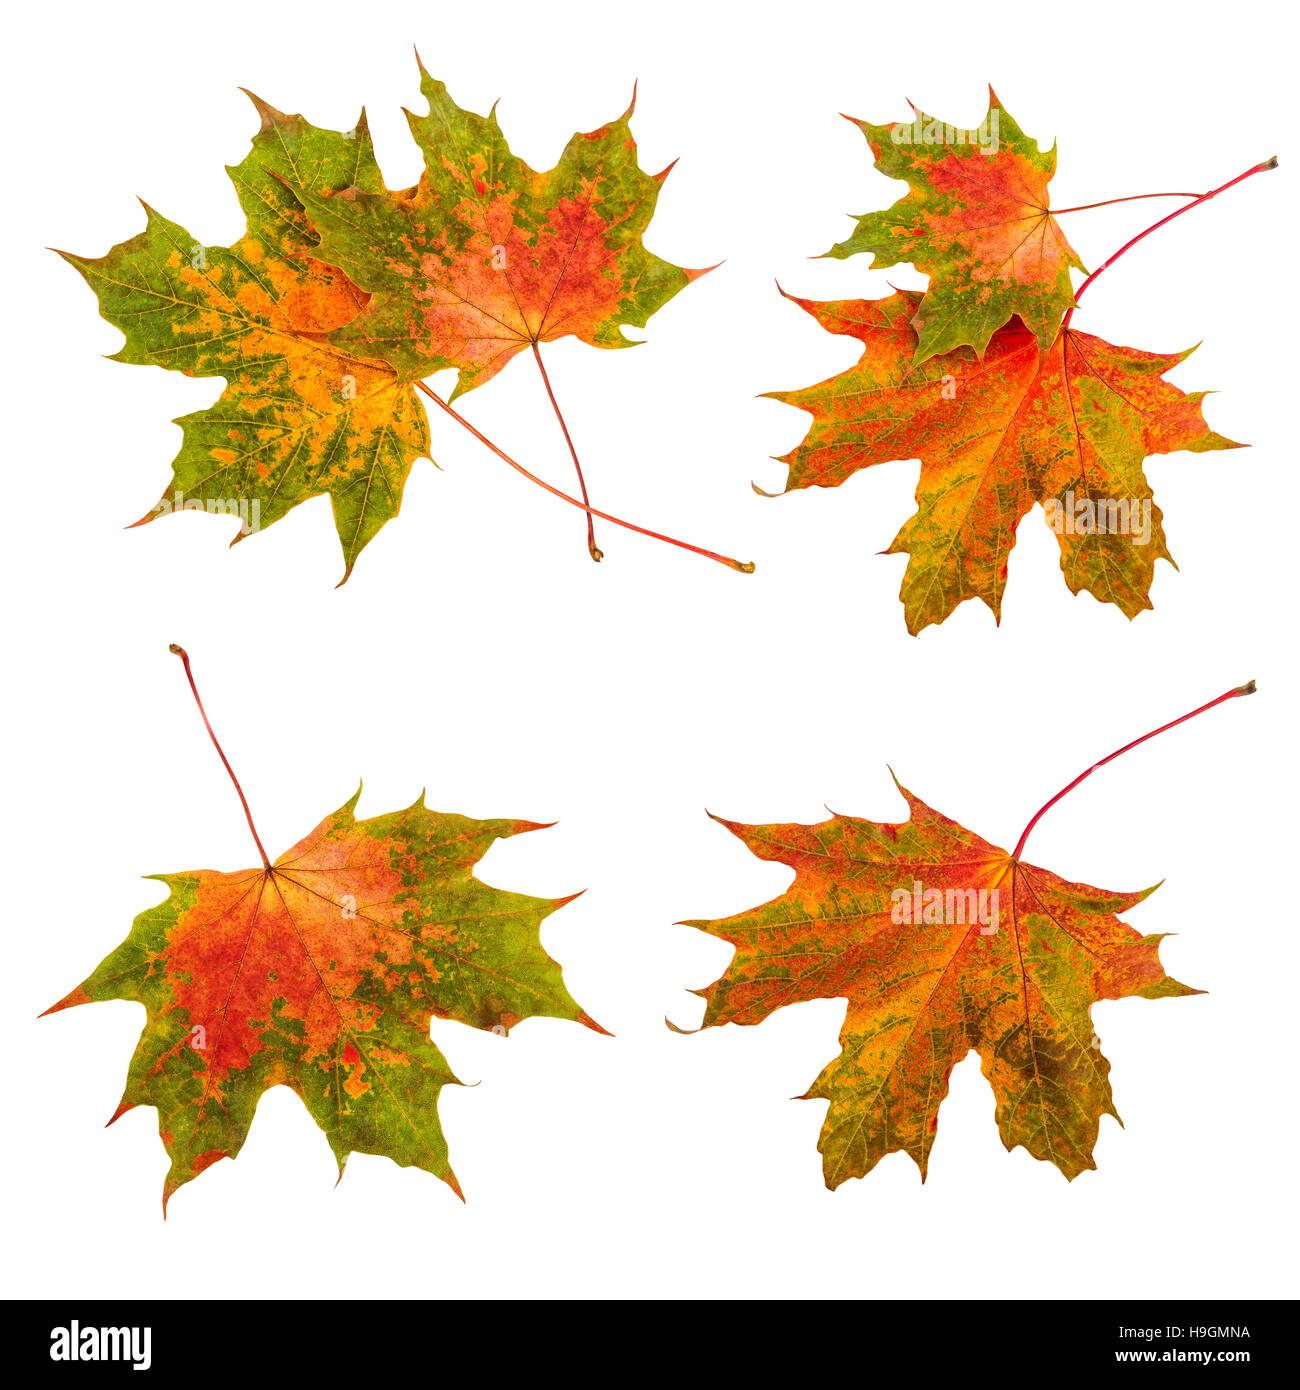 Autumn leaves set collection. Maple leaves isolated on white background. Stock Photo